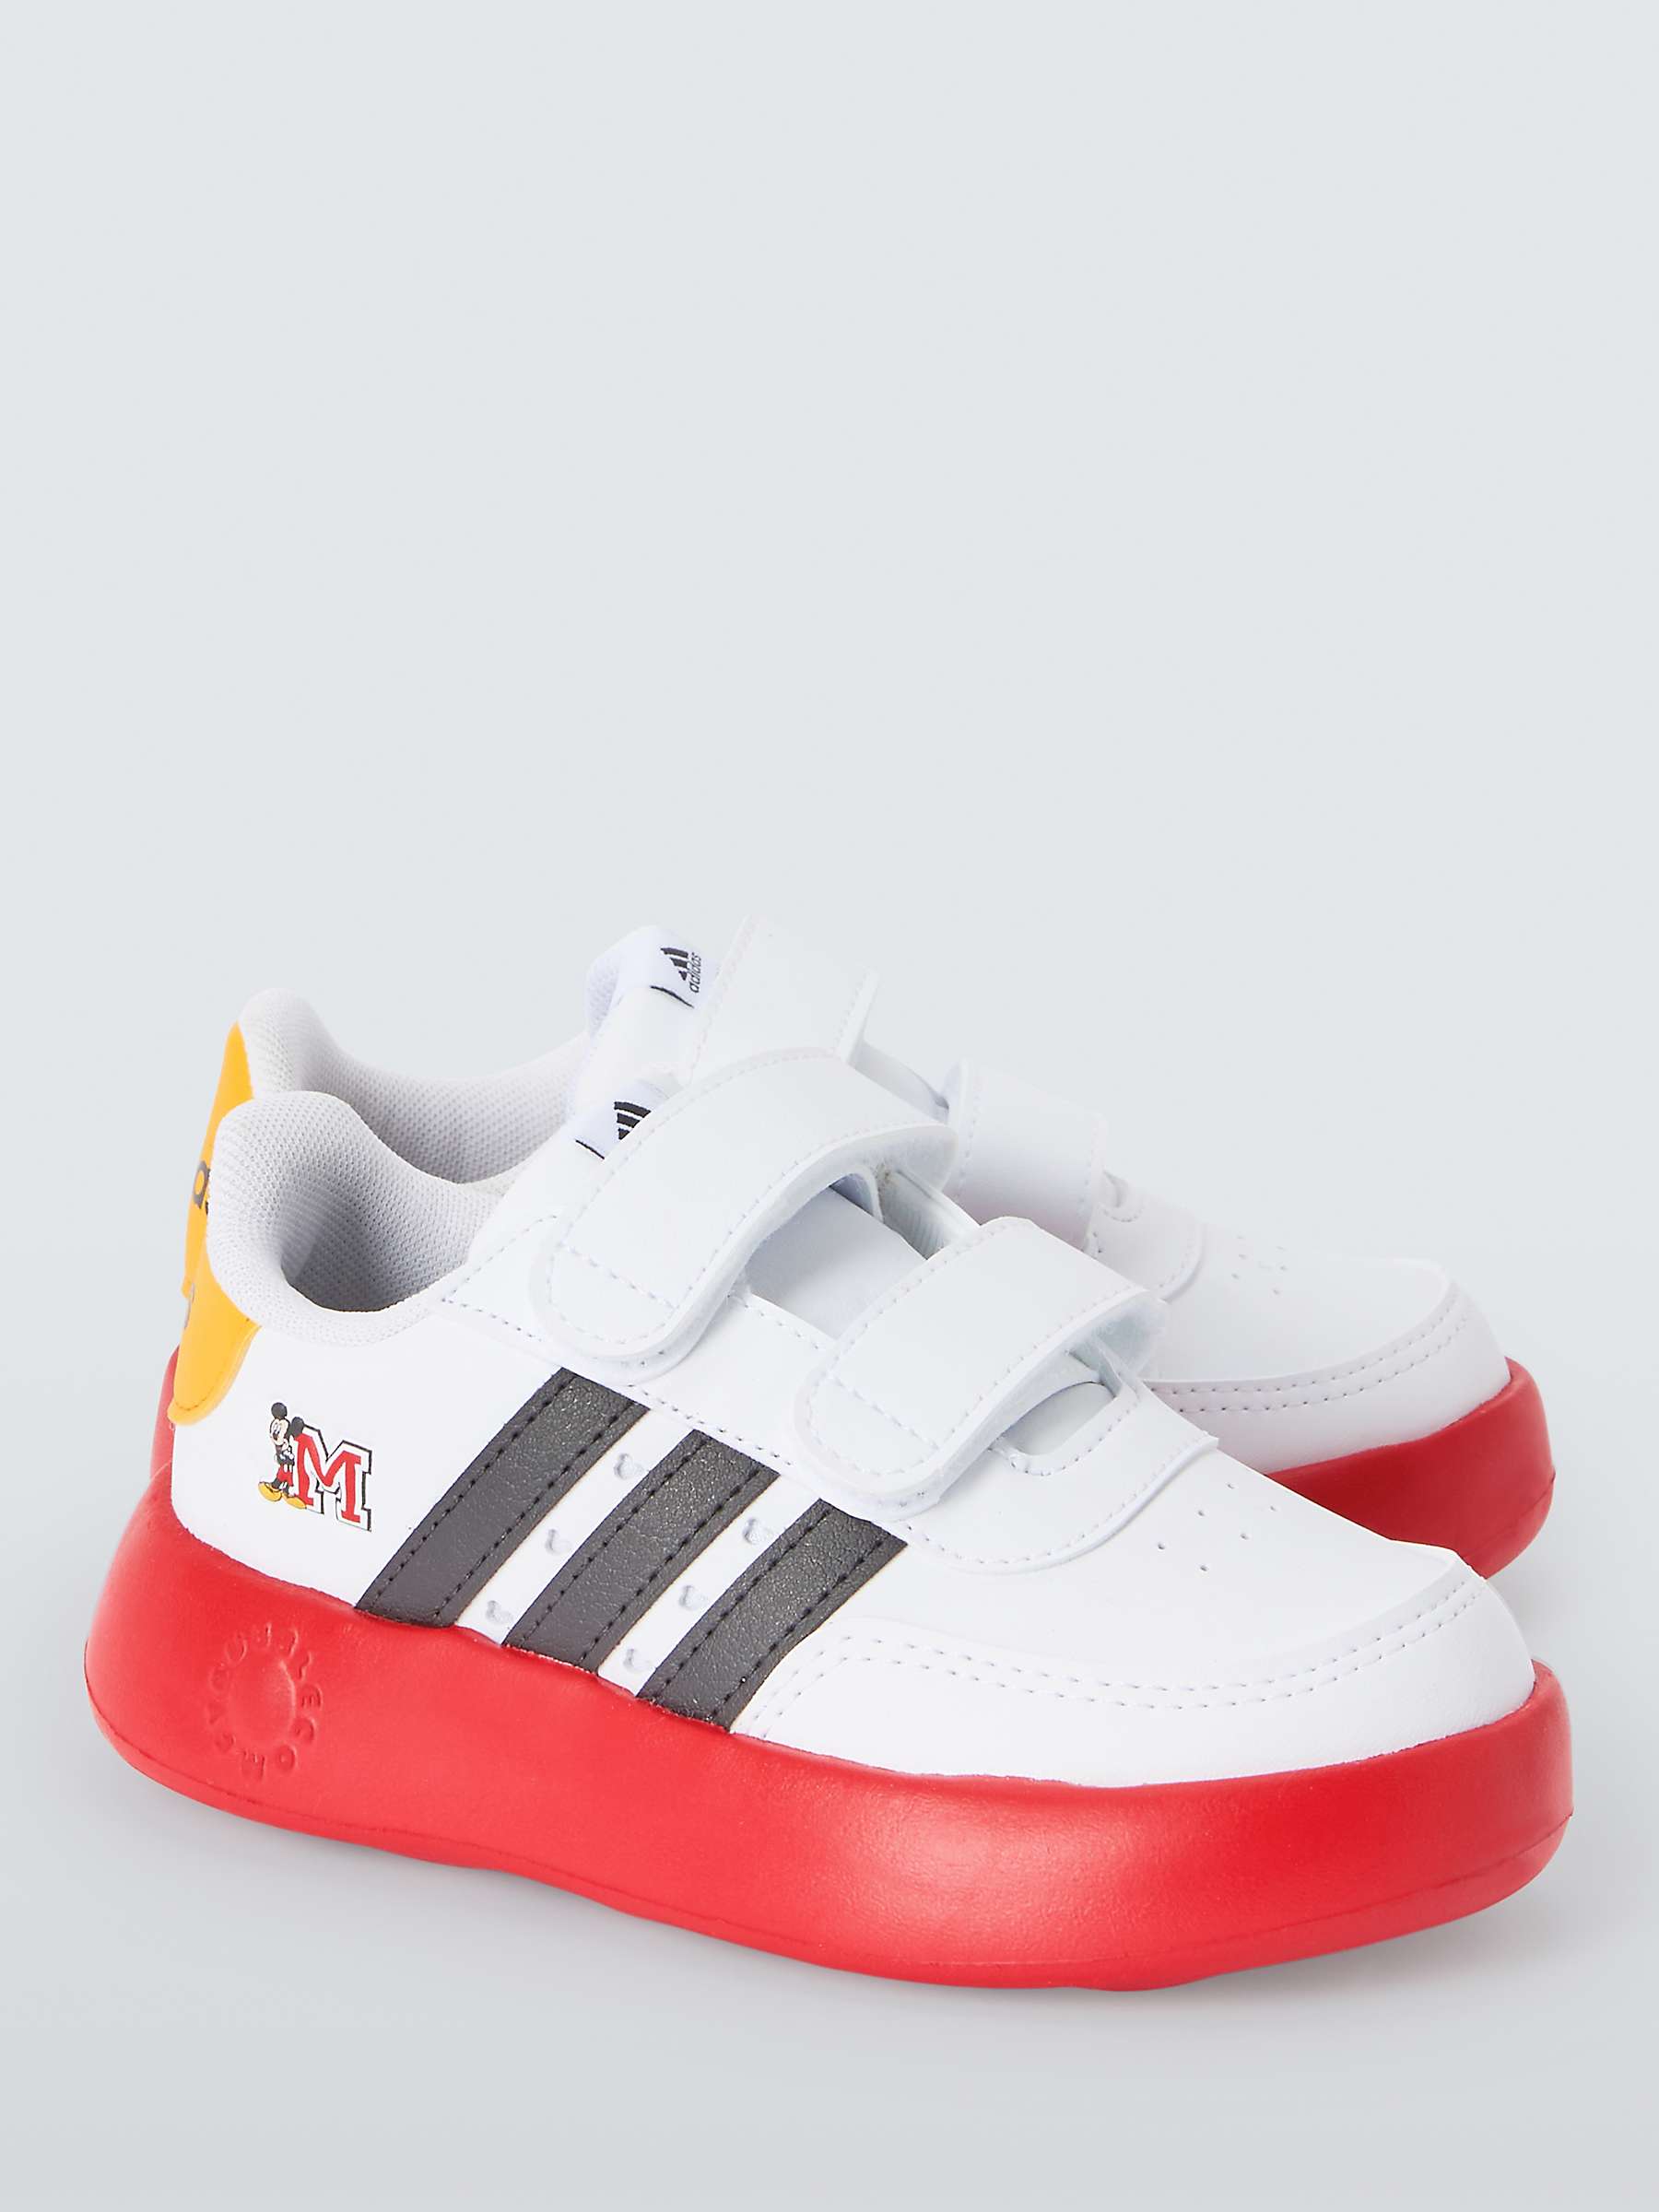 Buy adidas Kids' adidas X Disney Mickey Mouse Breaknet 2.0 Trainers, White/Multi Online at johnlewis.com